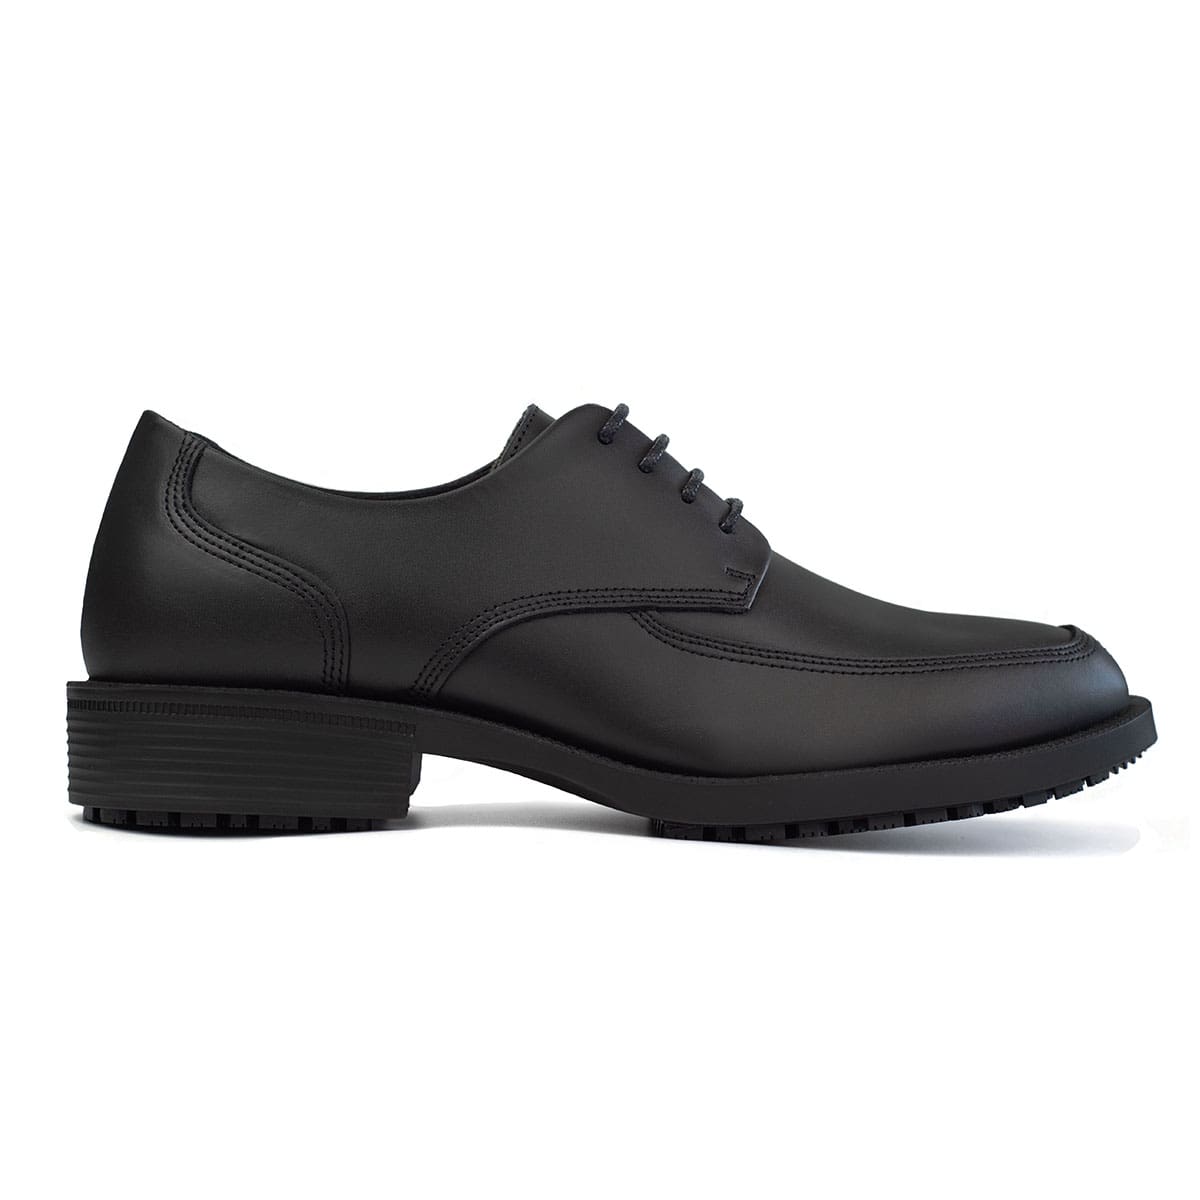 Slip resistant black formal shoe with waterproof leather upper and a removable, cushioned insole, right side view.